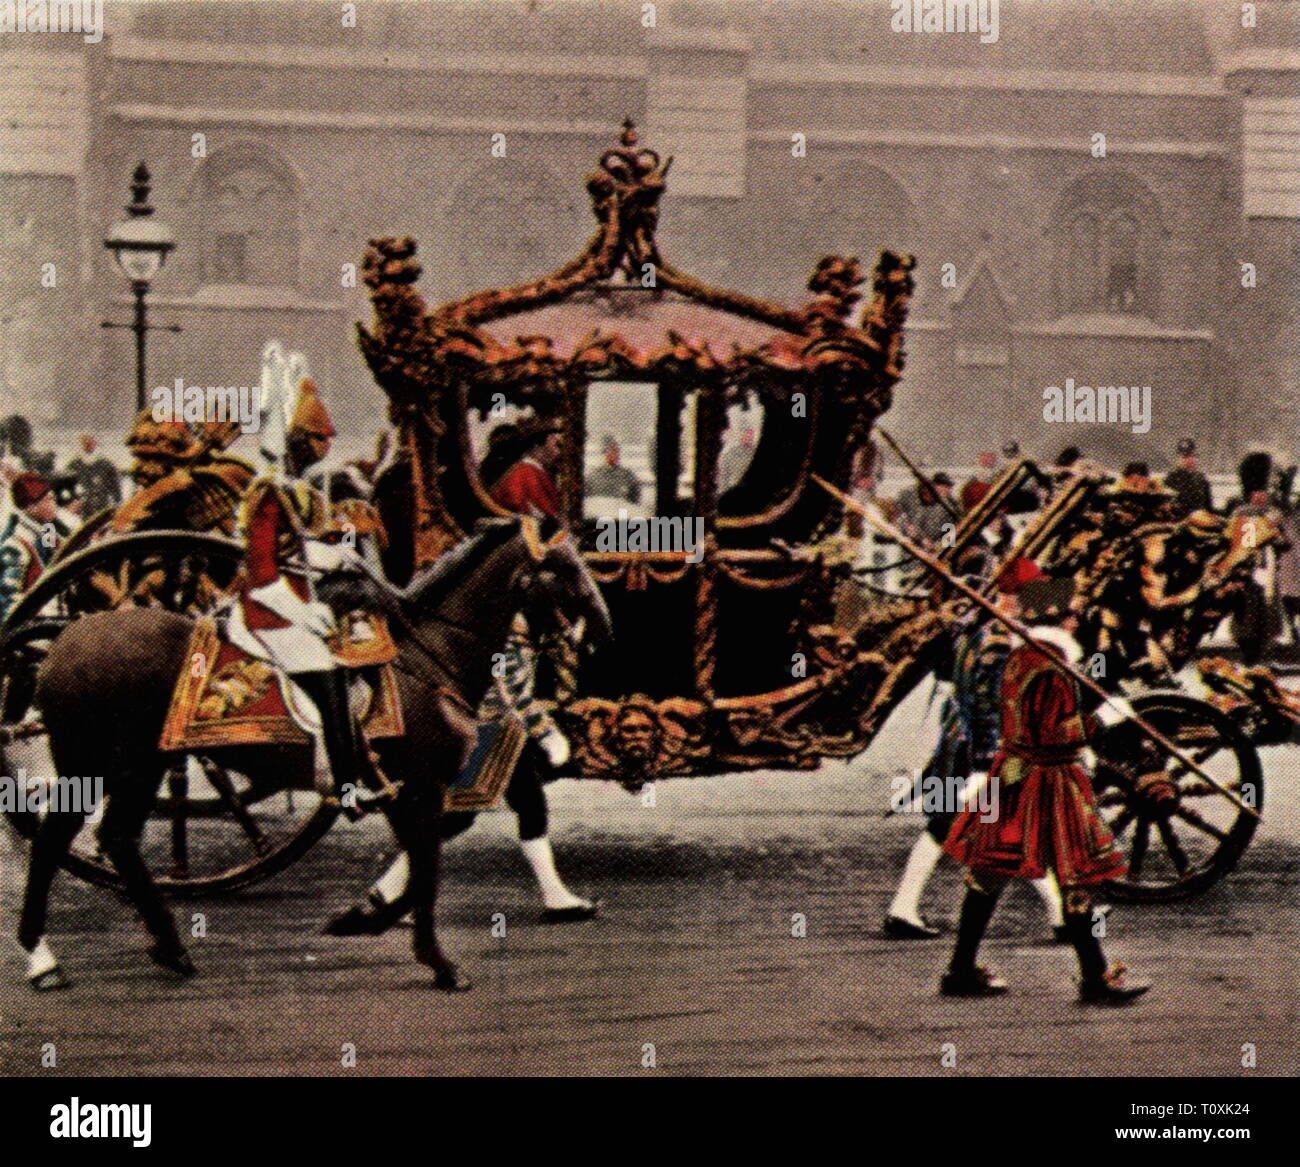 politics, parliament, Great Britain, opening, the British royal couple on the way to the opening of the English parliament, London, 4.2.1926, coloured photograph, cigarette card, series 'Die Nachkriegszeit', 1935, House of Windsor, parliamentary monarchy, ceremony, ceremonies, carriages, state coaches, state coach, state carriage, Great Britain, United Kingdom, people, 1920s, 20th century, politics, policy, way, ways, opening, openings, parliament, parliaments, coloured, colored, post war period, post-war period, post-war years, post-war era, his, Additional-Rights-Clearance-Info-Not-Available Stock Photo